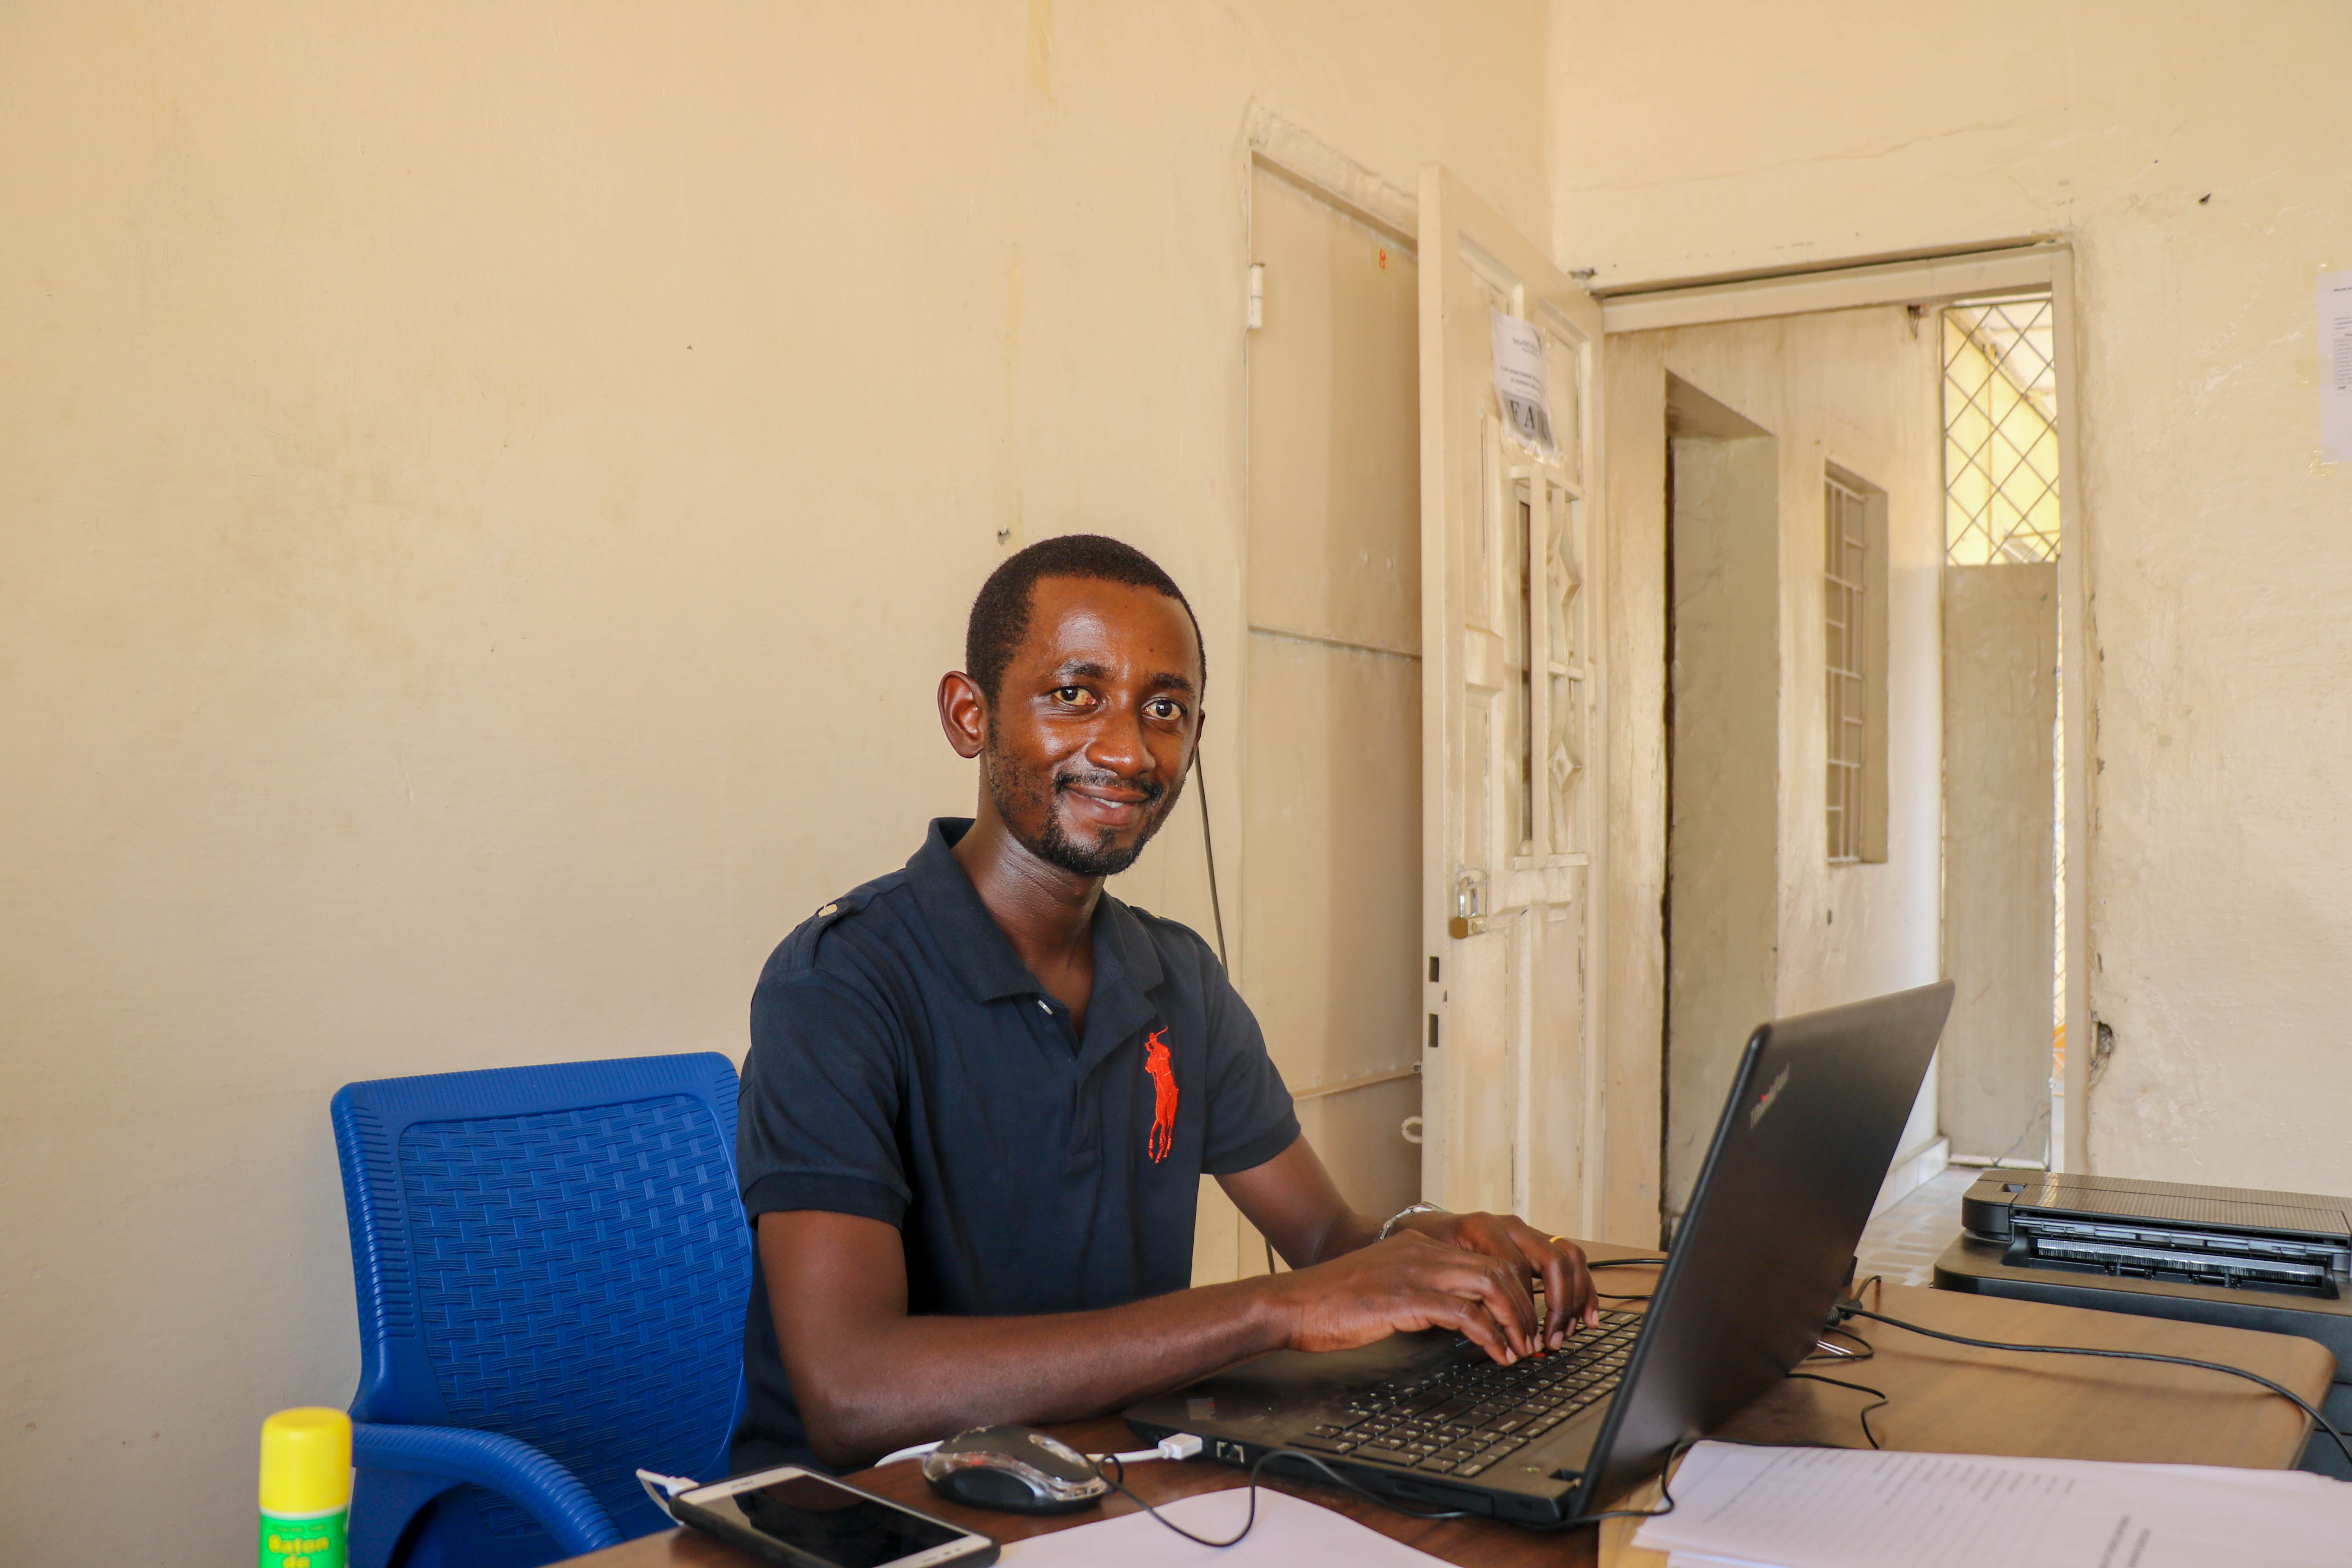 Claude is a Food Assistance Information and Reporting Assistant for World Vision's Kasais Response